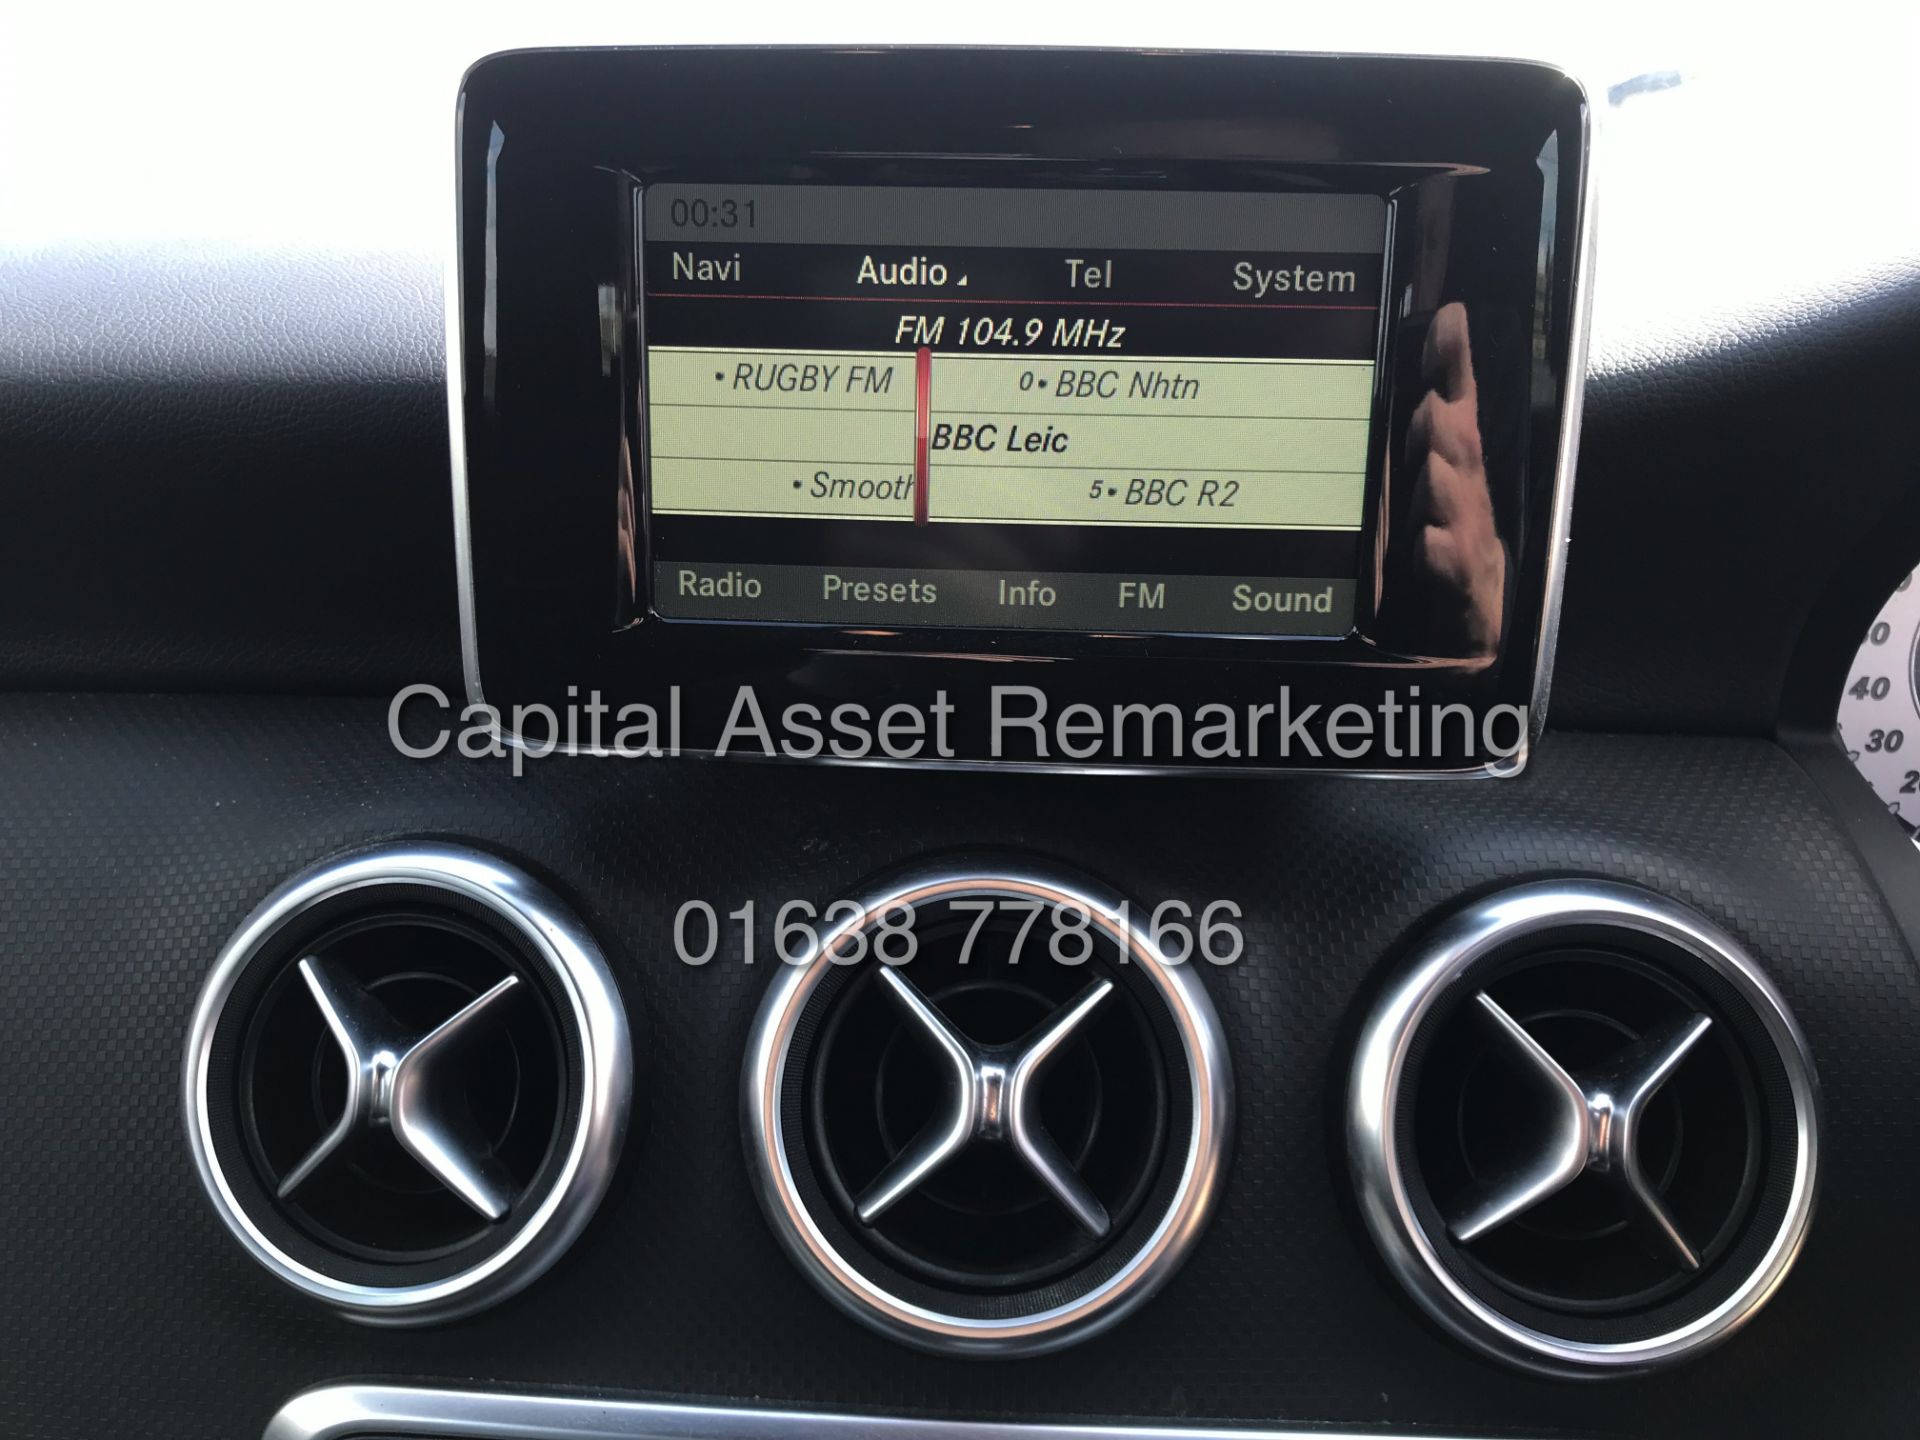 (ON SALE) MERCEDES A180d "SPORT" (15 REG) ONLY 1 OWNER FSH - SAT NAV - LEATHER - AIR CON - CRUISE - Image 13 of 21